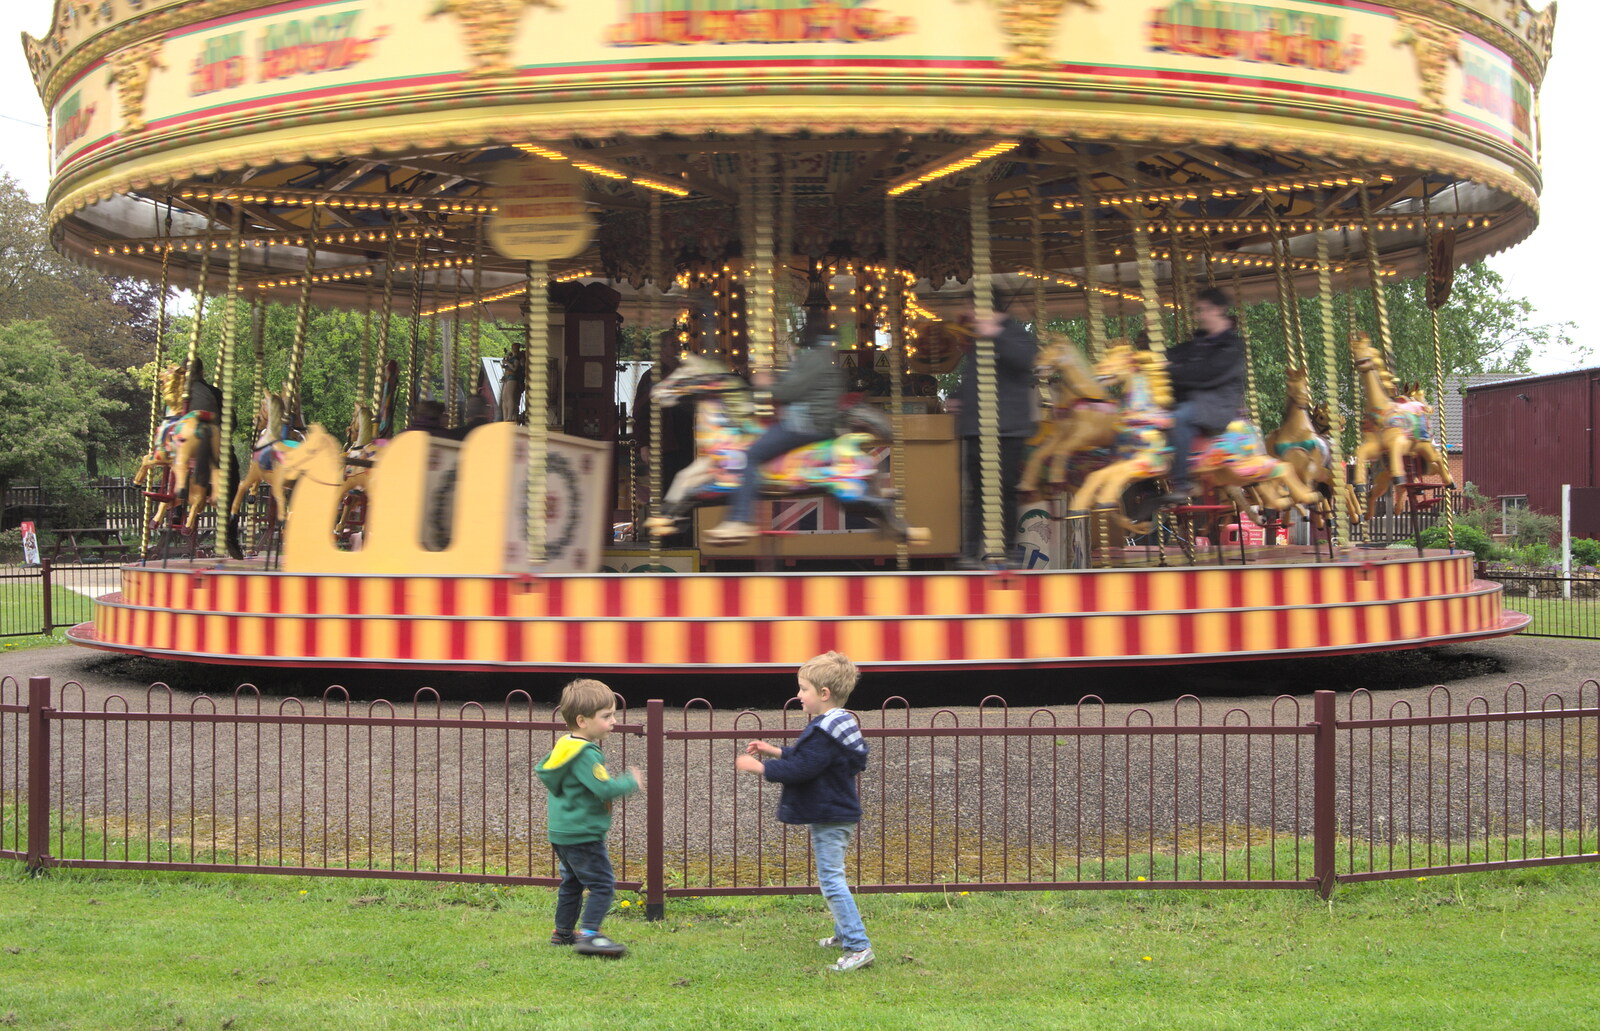 Kaine and Fred in front of the Gallopers from A Day at Bressingham Steam and Gardens, Diss, Norfolk - 18th May 2013